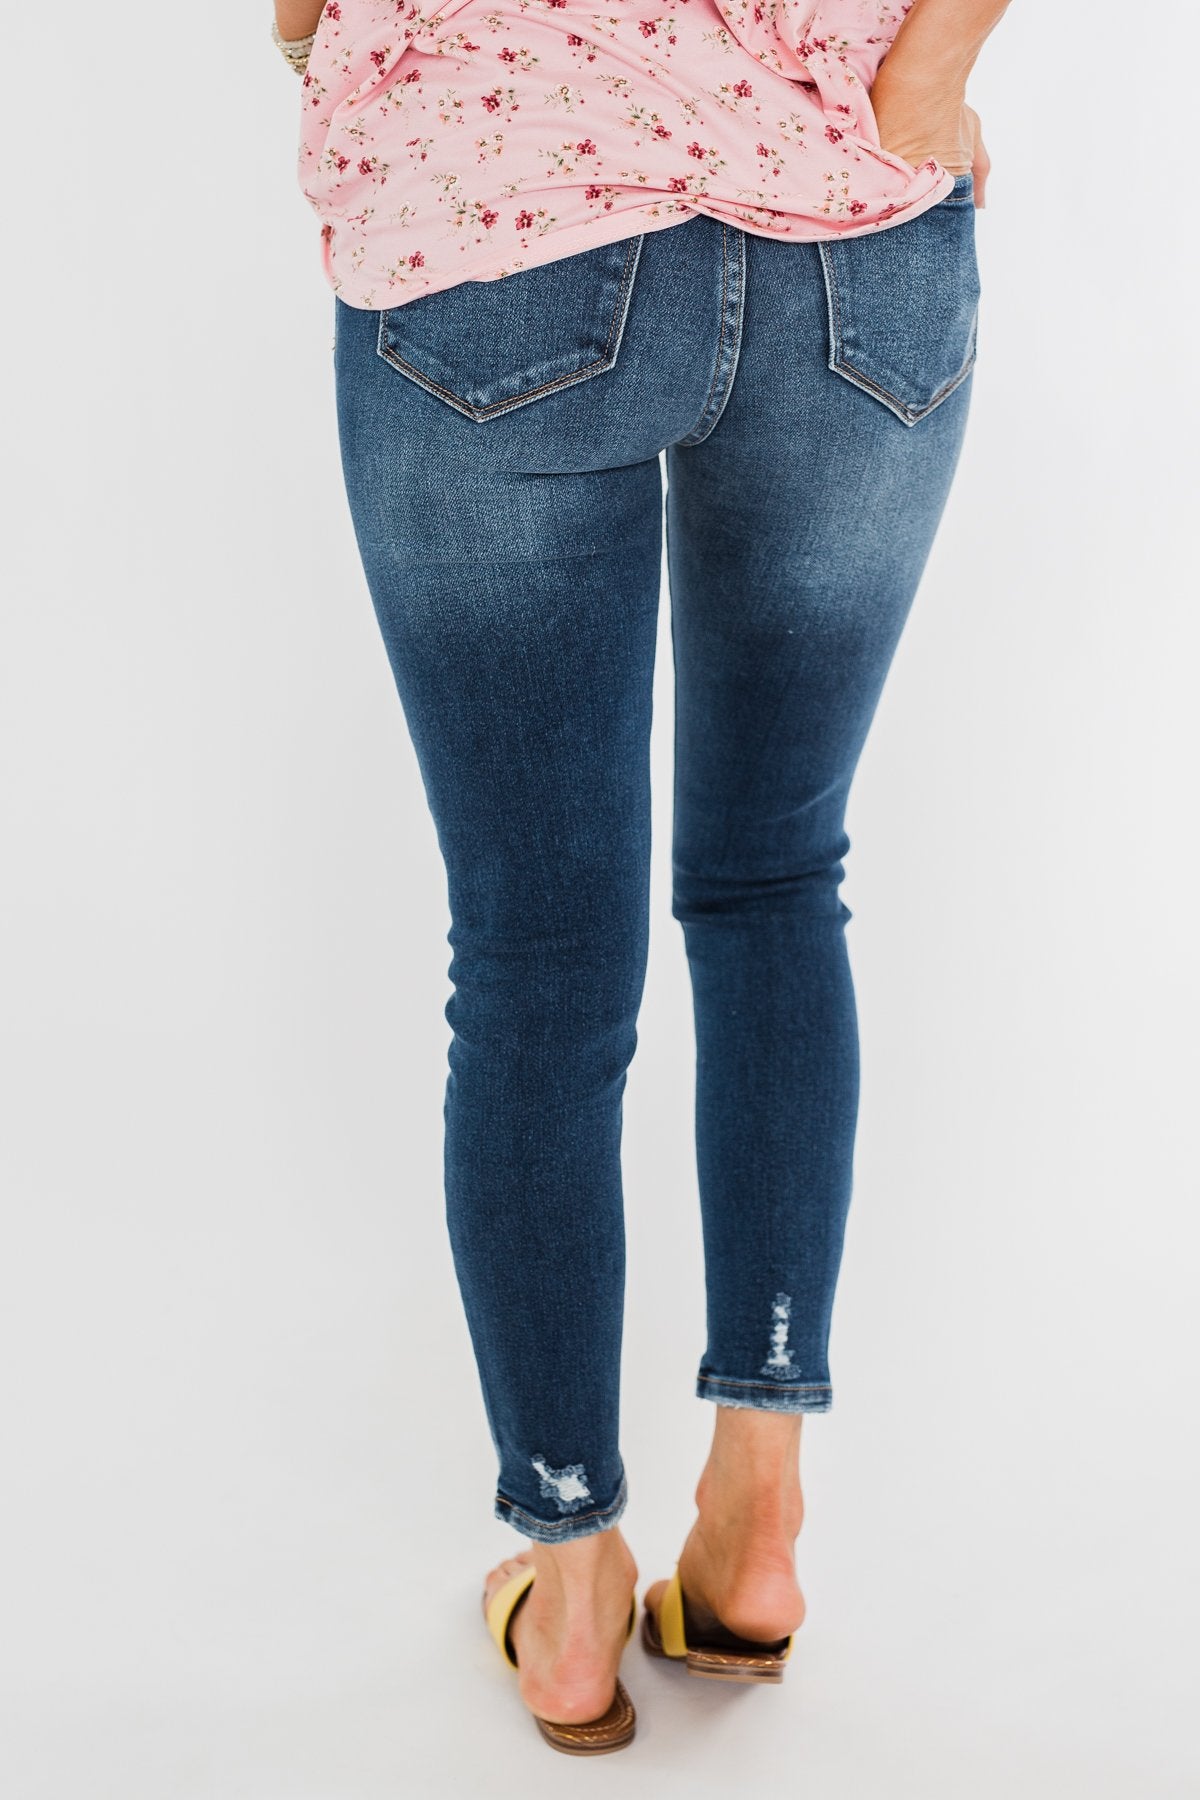 KanCan Ankle Skinny Jeans- Clarissa Wash – The Pulse Boutique